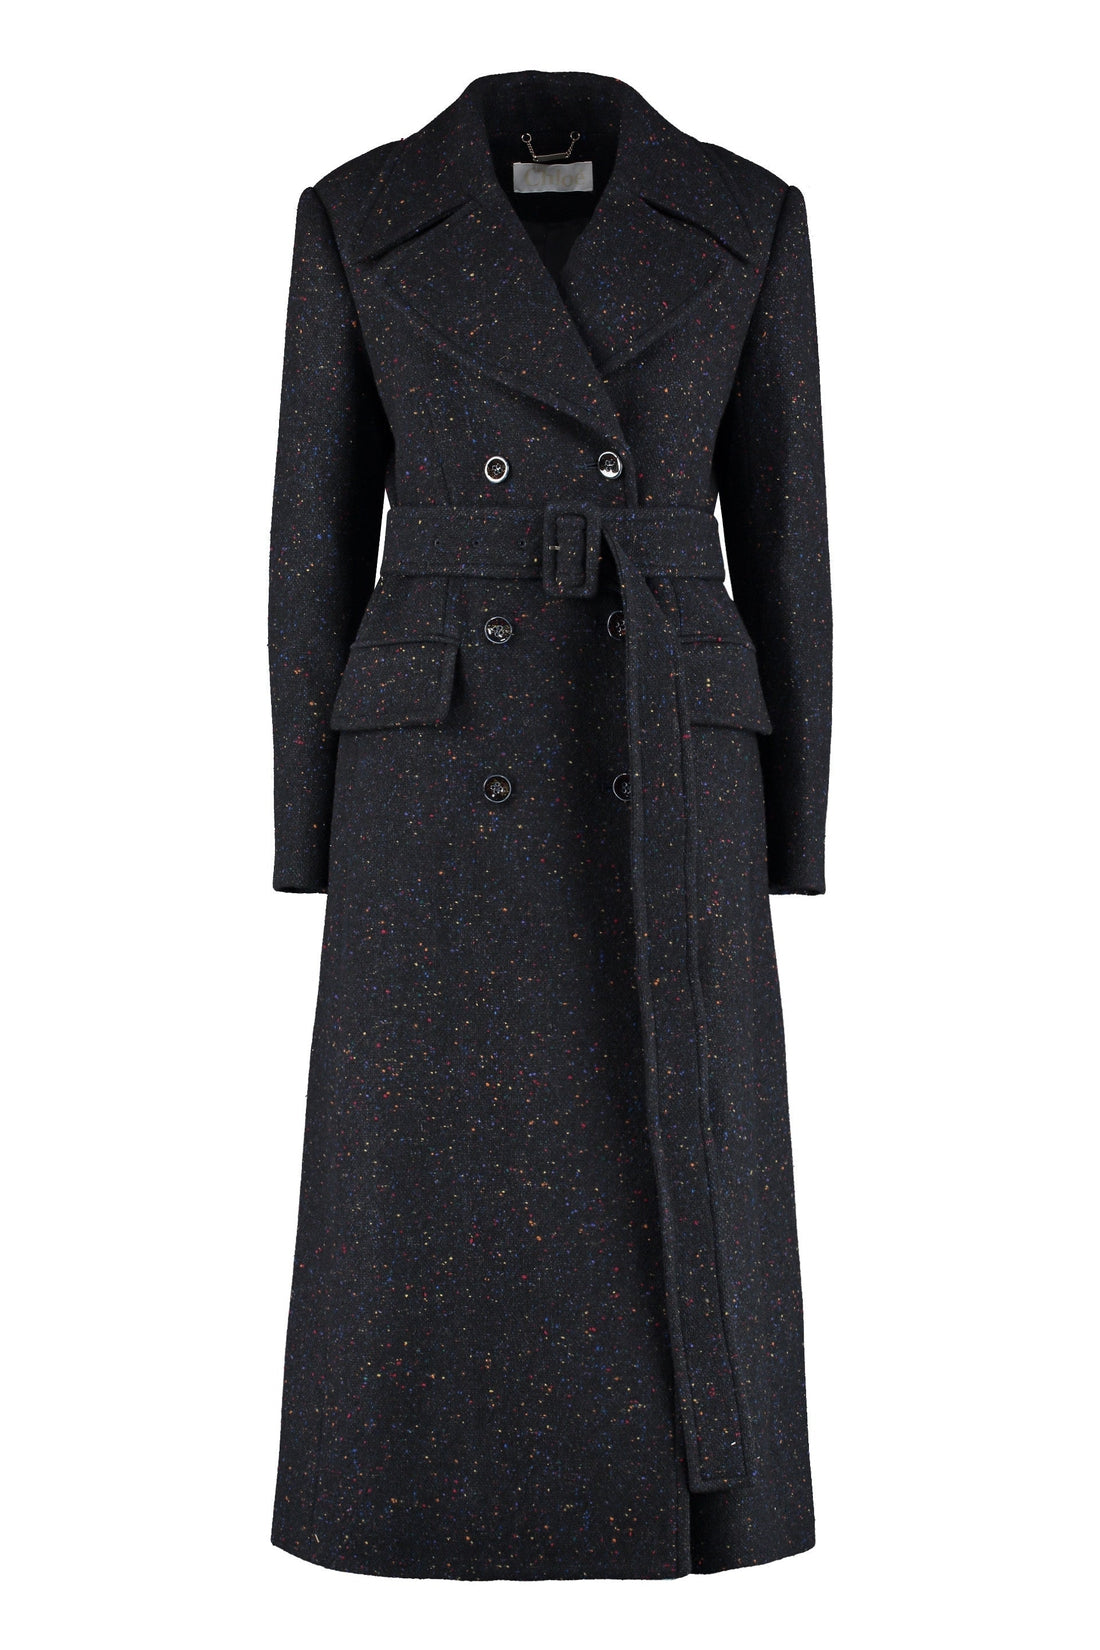 Chloé-OUTLET-SALE-Belted double-breasted coat-ARCHIVIST